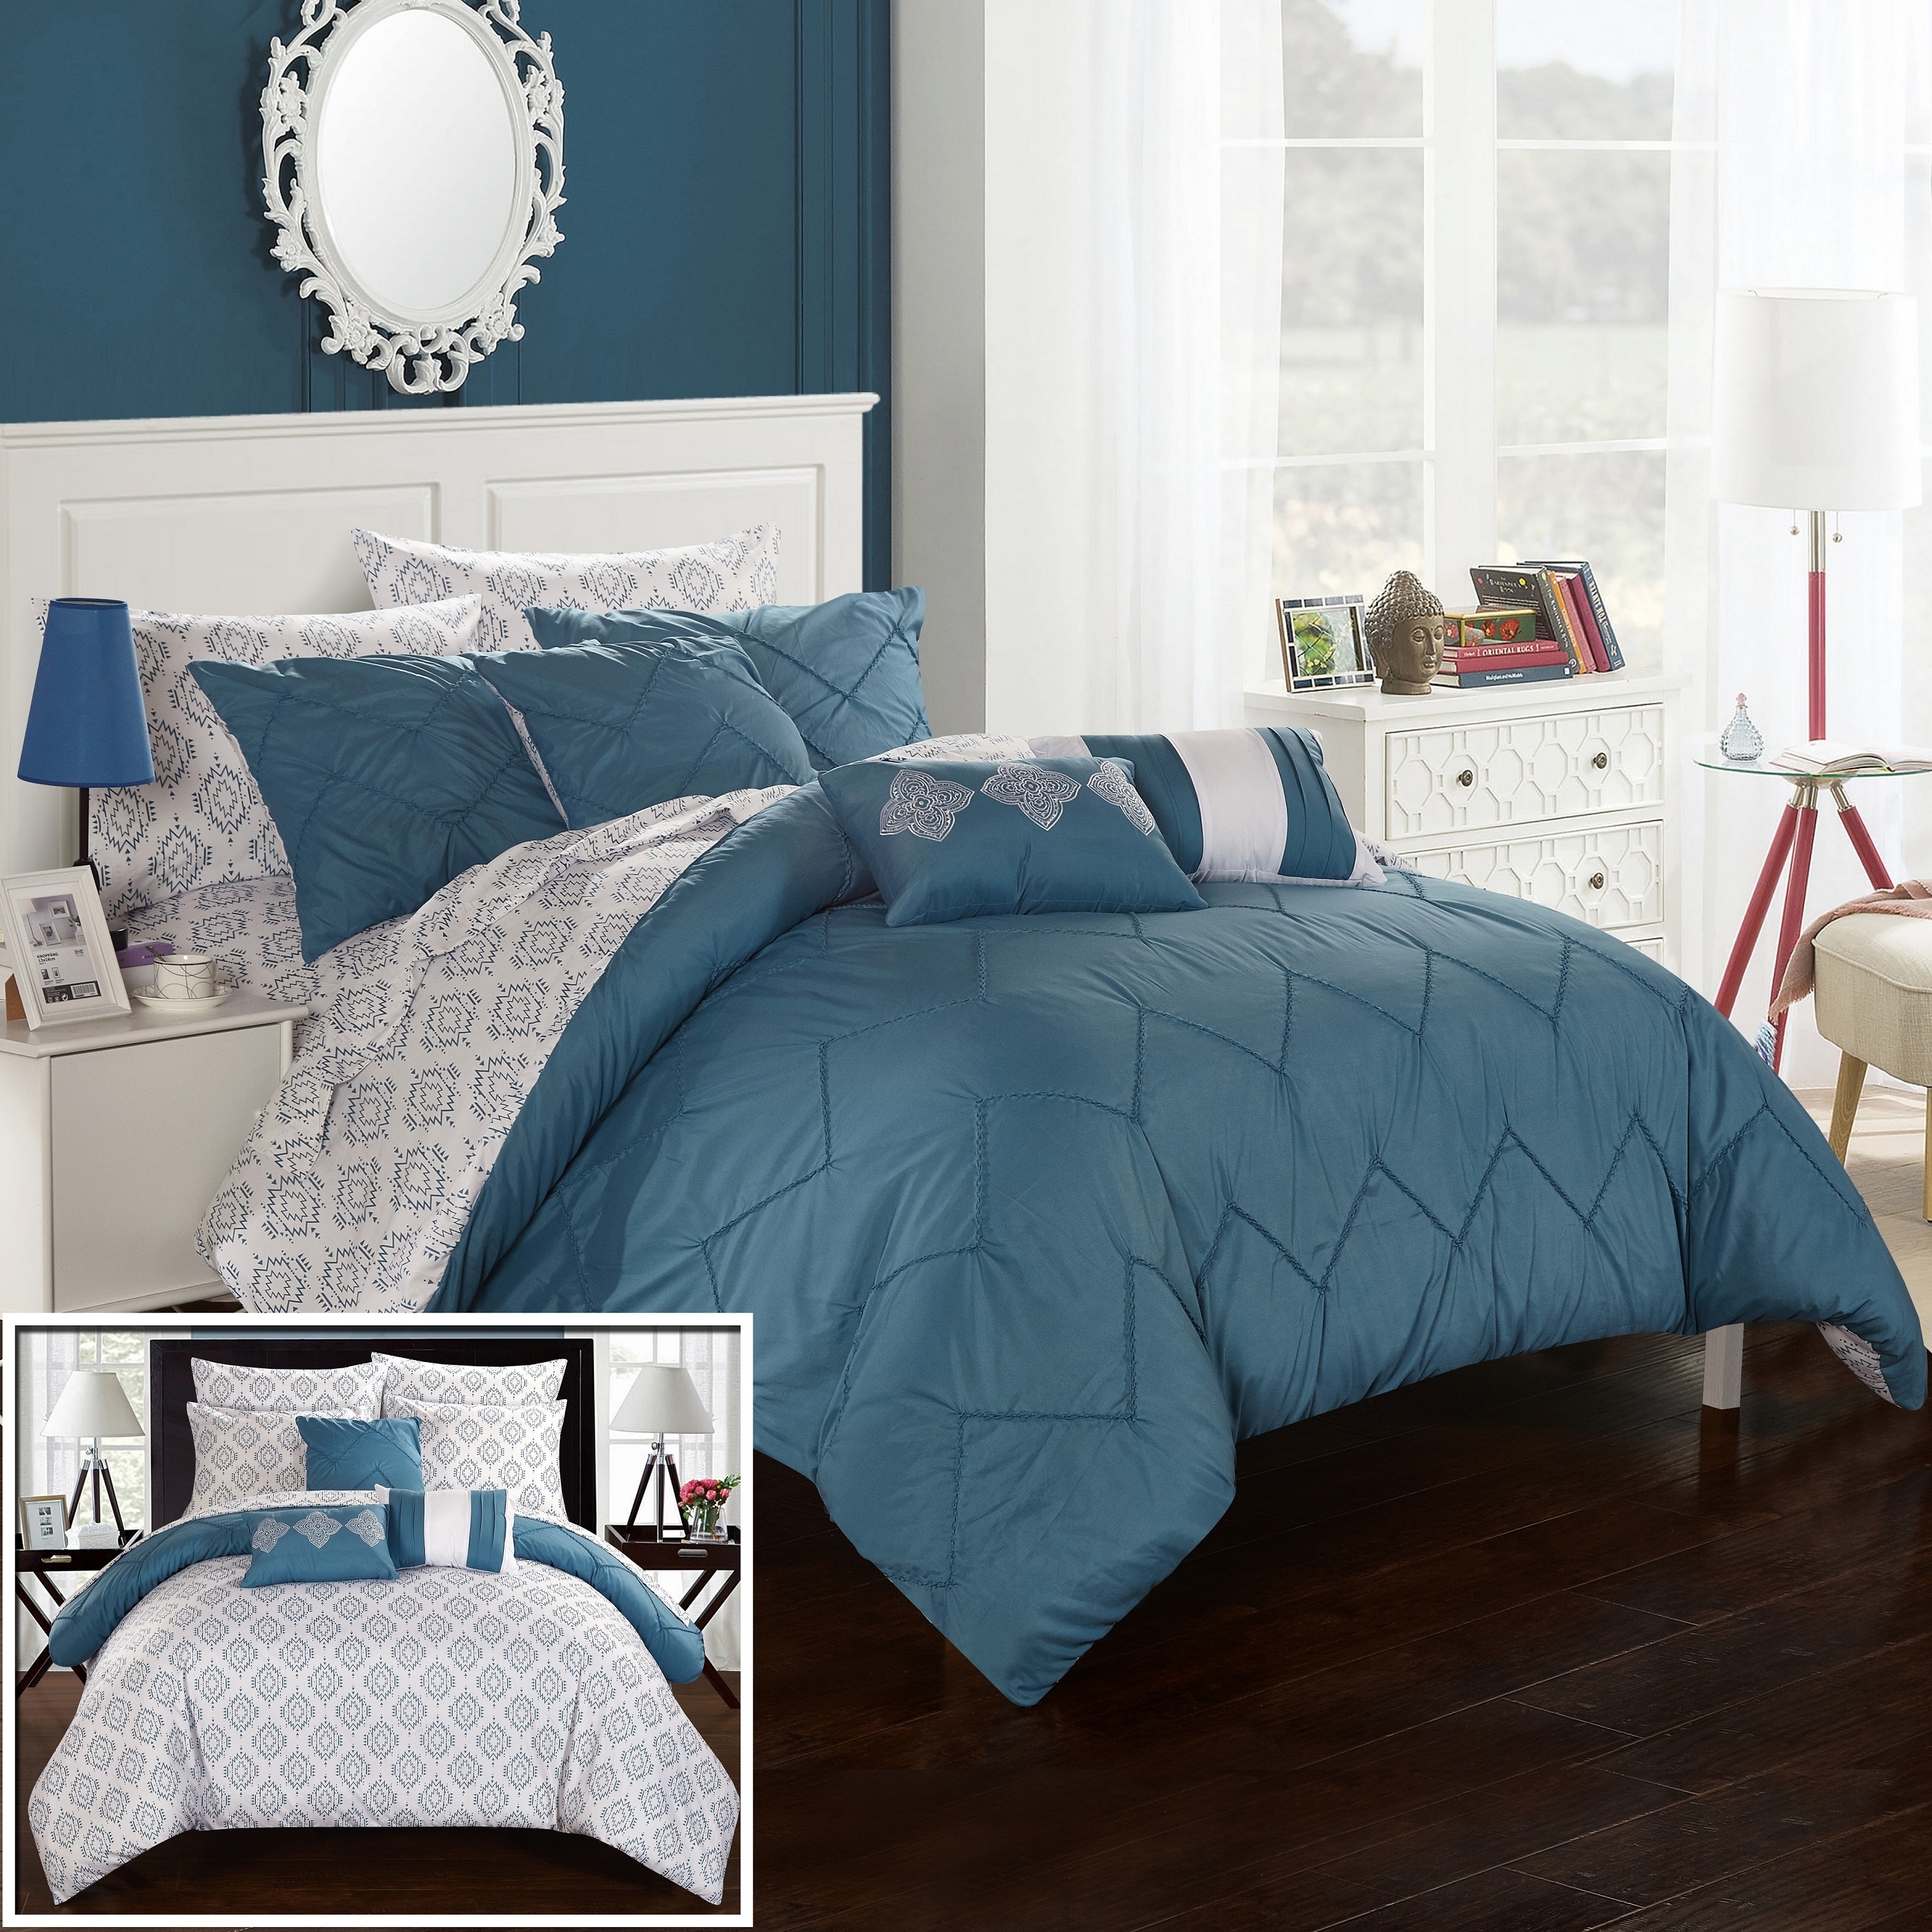 10 Piece Dahlia Rope Like Pinch Pleated Reversible Oversized And Overfilled Bed In A Bag Comforter Set With Sheet Set - Blue, King